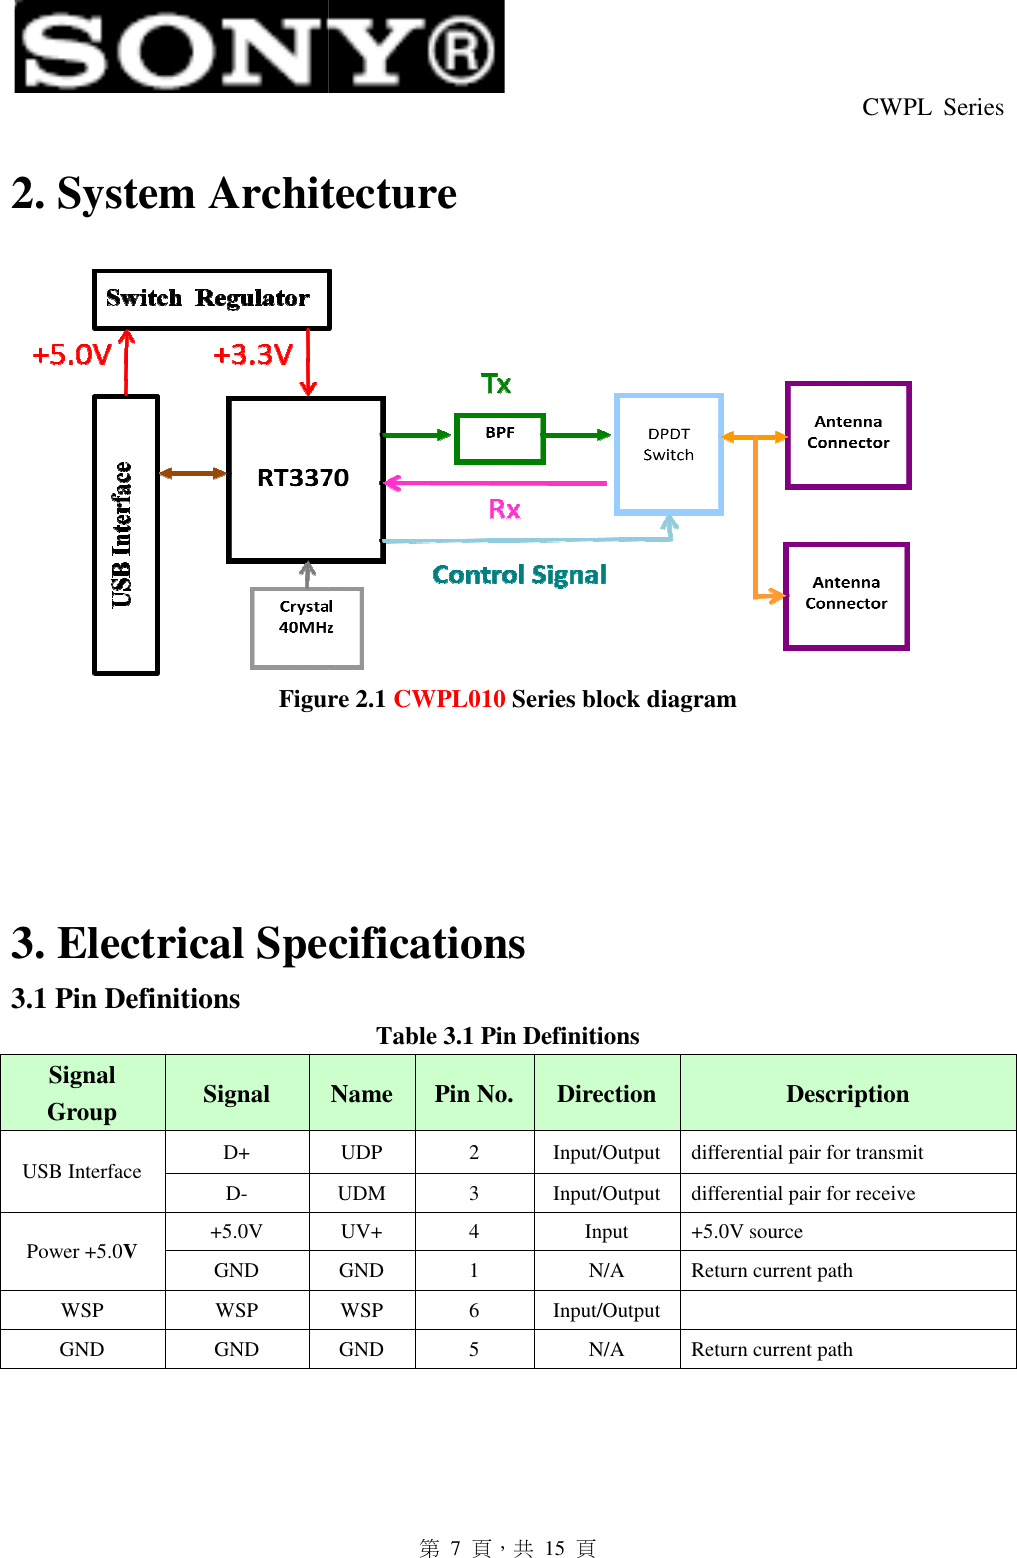  2. System Architecture Figure 2.1 3. Electrical Specifications3.1 Pin Definitions Signal Group  Signal USB Interface  D+ D- Power +5.0V +5.0V GND WSP  WSP GND  GND     第  7  頁，共  15  頁 2. System Architecture Figure 2.1 CWPL010 Series block diagram      Electrical Specifications  Table 3.1 Pin Definitions Name  Pin No.  Direction UDP  2  Input/Output differential pairUDM  3  Input/Output differential pairUV+  4  Input  +5.0V sourceGND  1  N/A Return current pathWSP  6  Input/Output   GND  5  N/A Return current pathCWPL  Series    Description differential pair for transmit differential pair for receive V source Return current path Return current path 